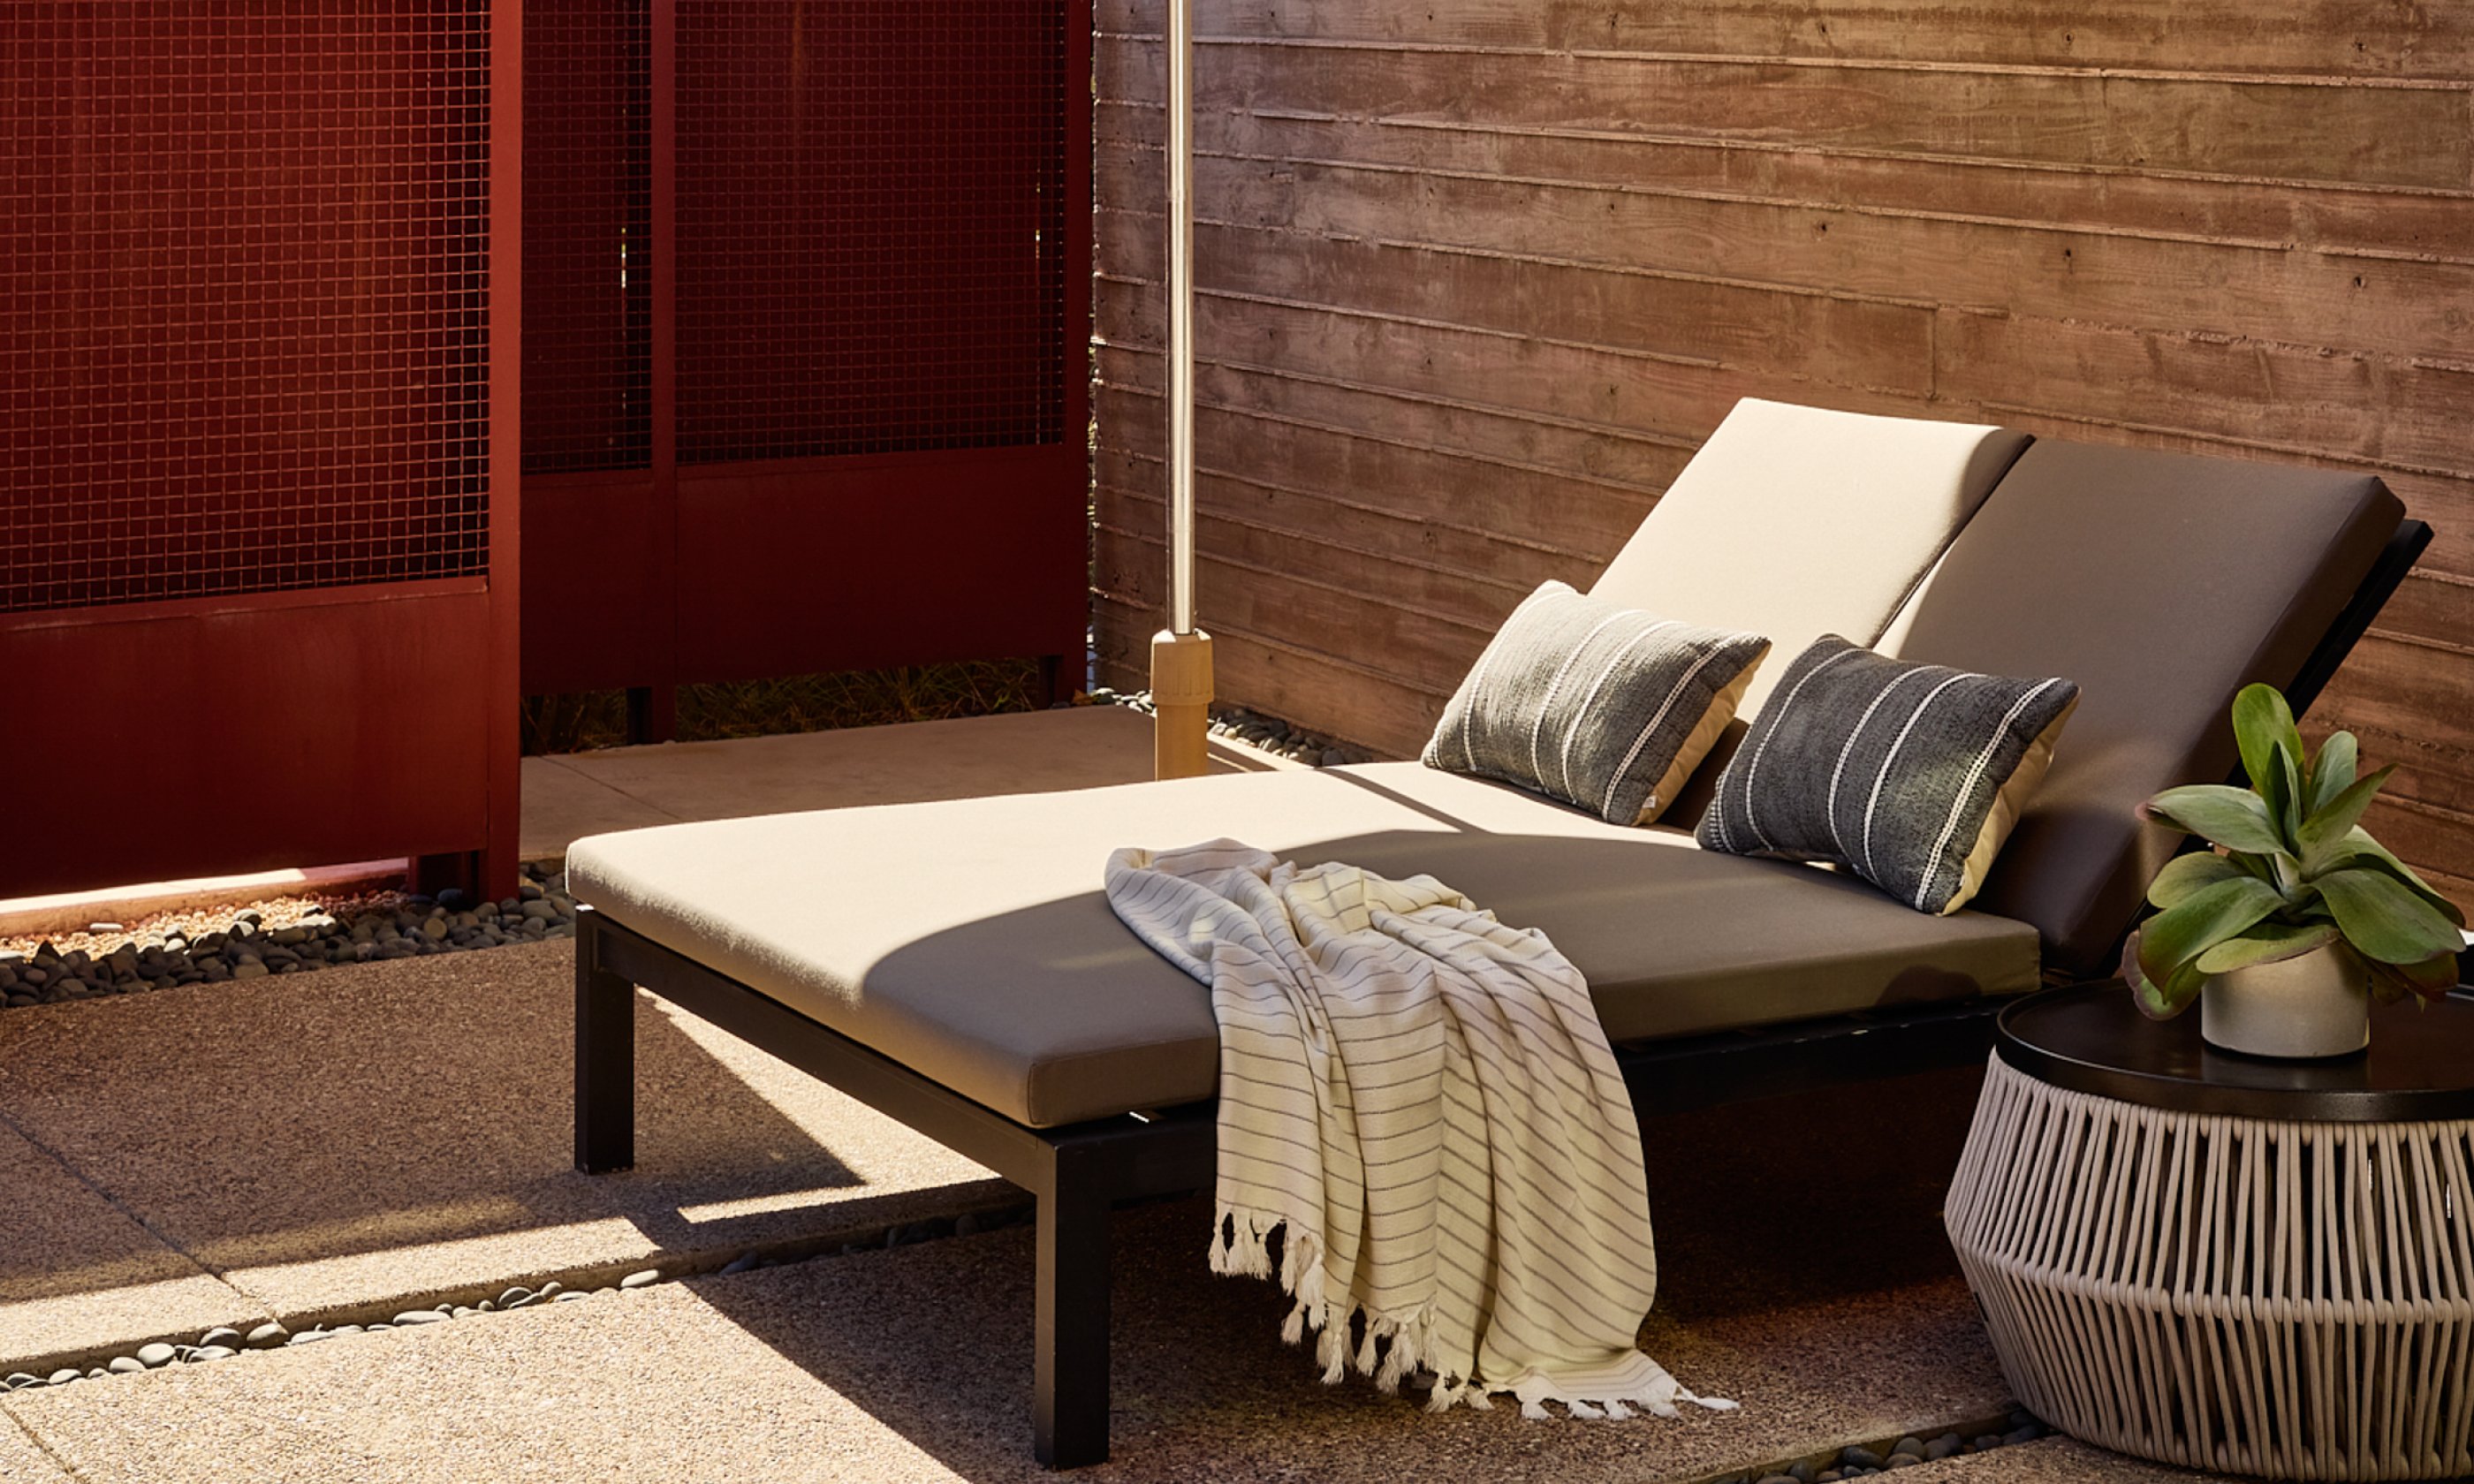 Couples lounge chair on terrace casita outdoor patio.